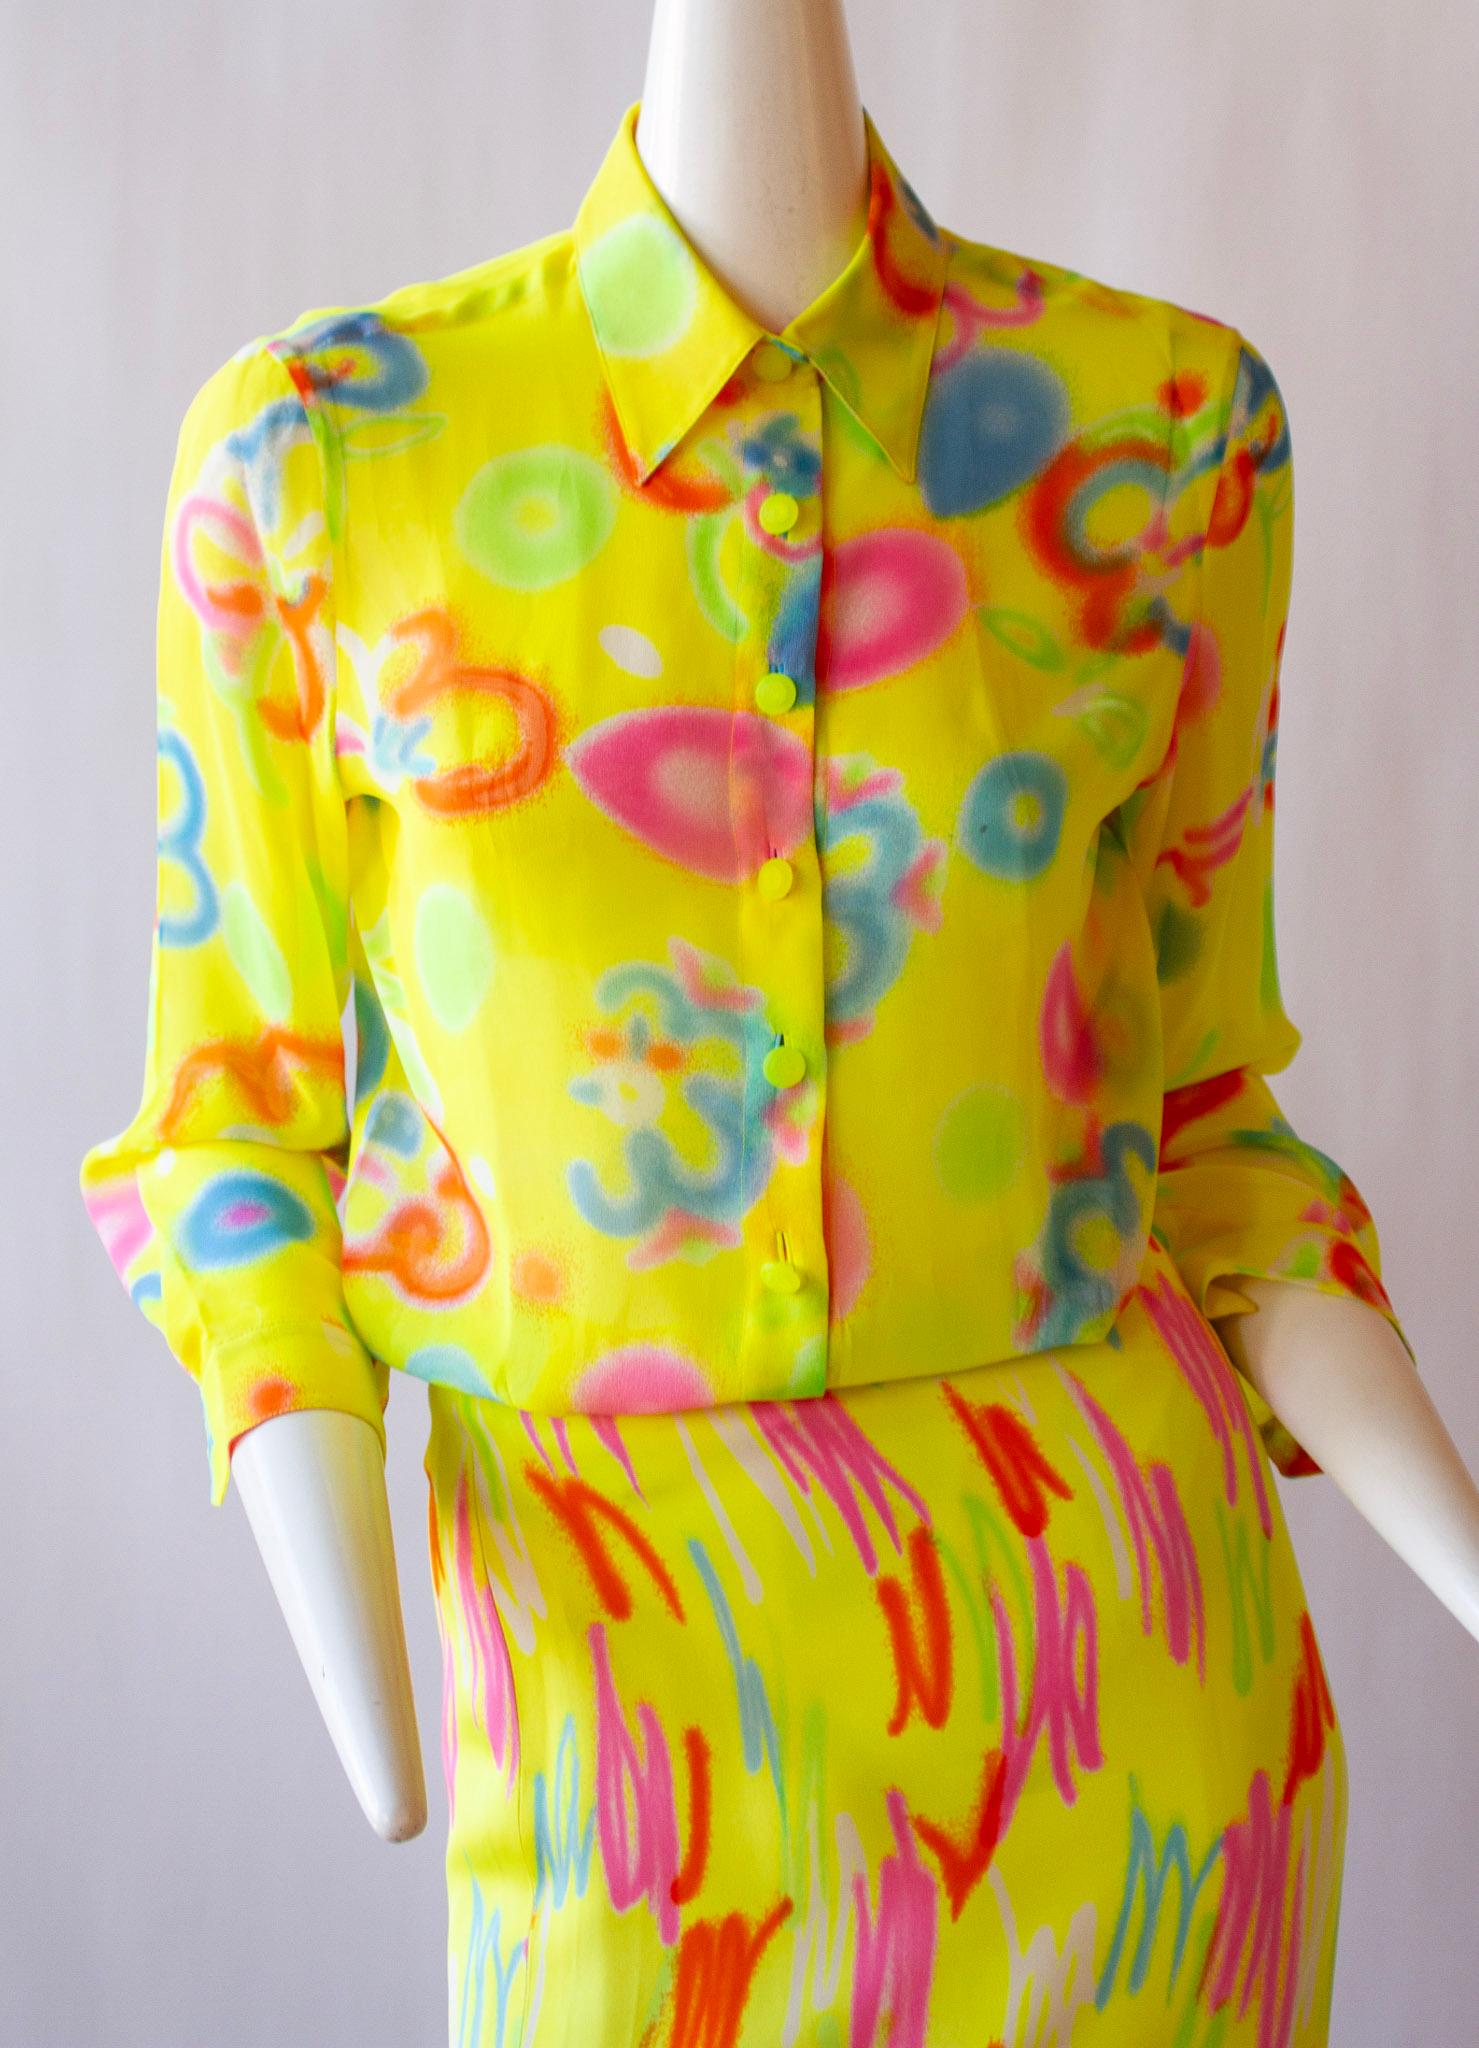 Versace S/S 1996 Neon Yellow Spray Paint Ensemble In Excellent Condition For Sale In Kingston, NY